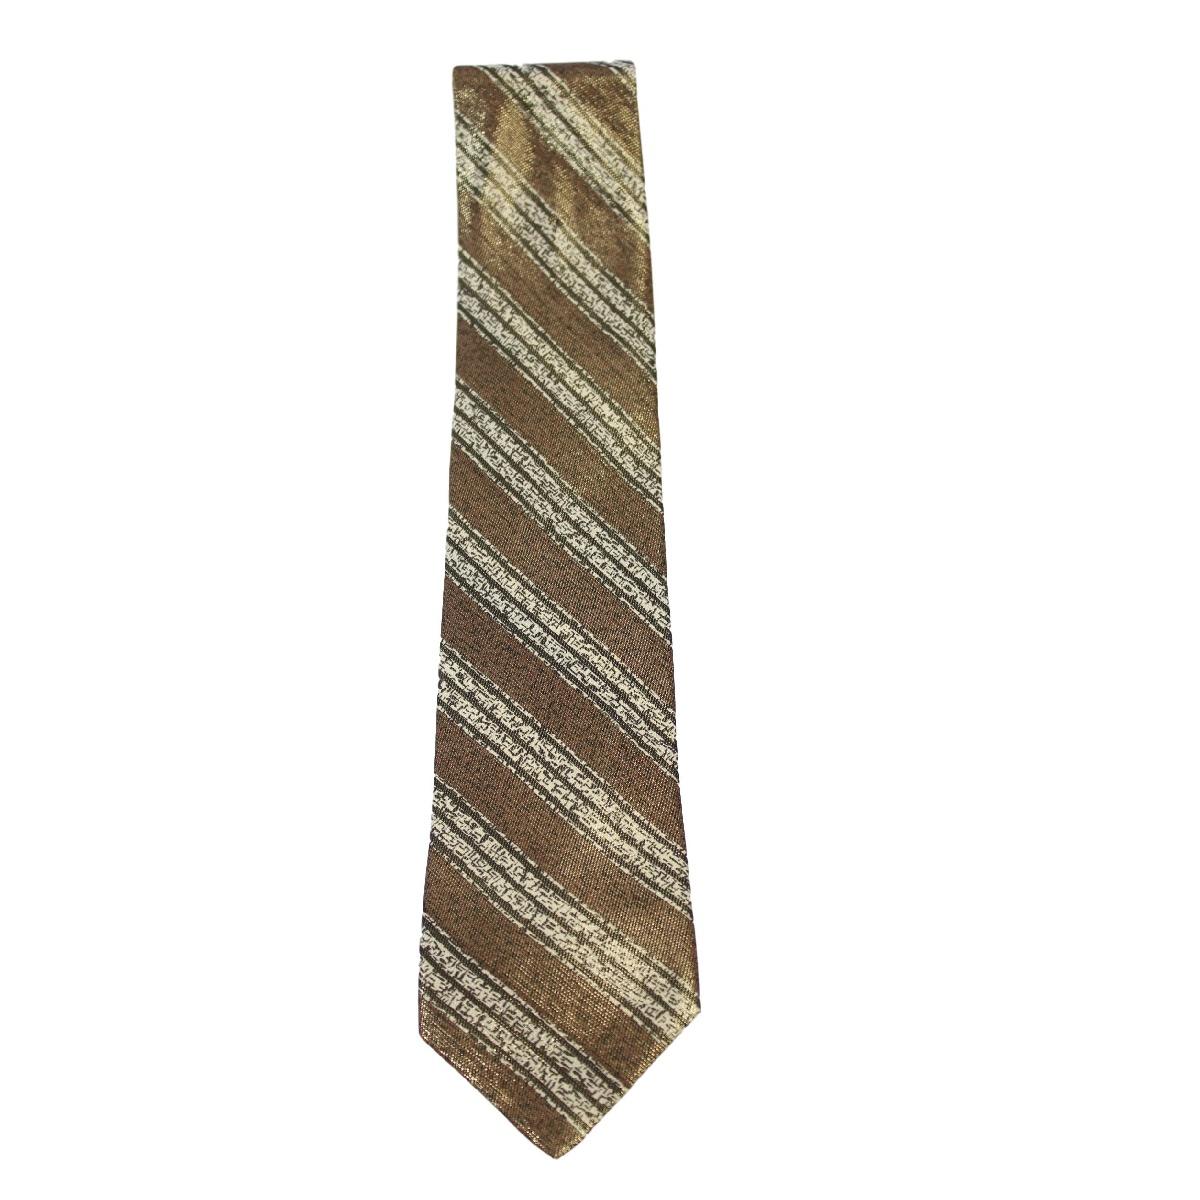 Brioni vintage classic tie. Gold and green tie has iridescent geometric designs, 100% silk. Made in Italy. New without label.

Length: about 147 cm
Width: about 8 cm